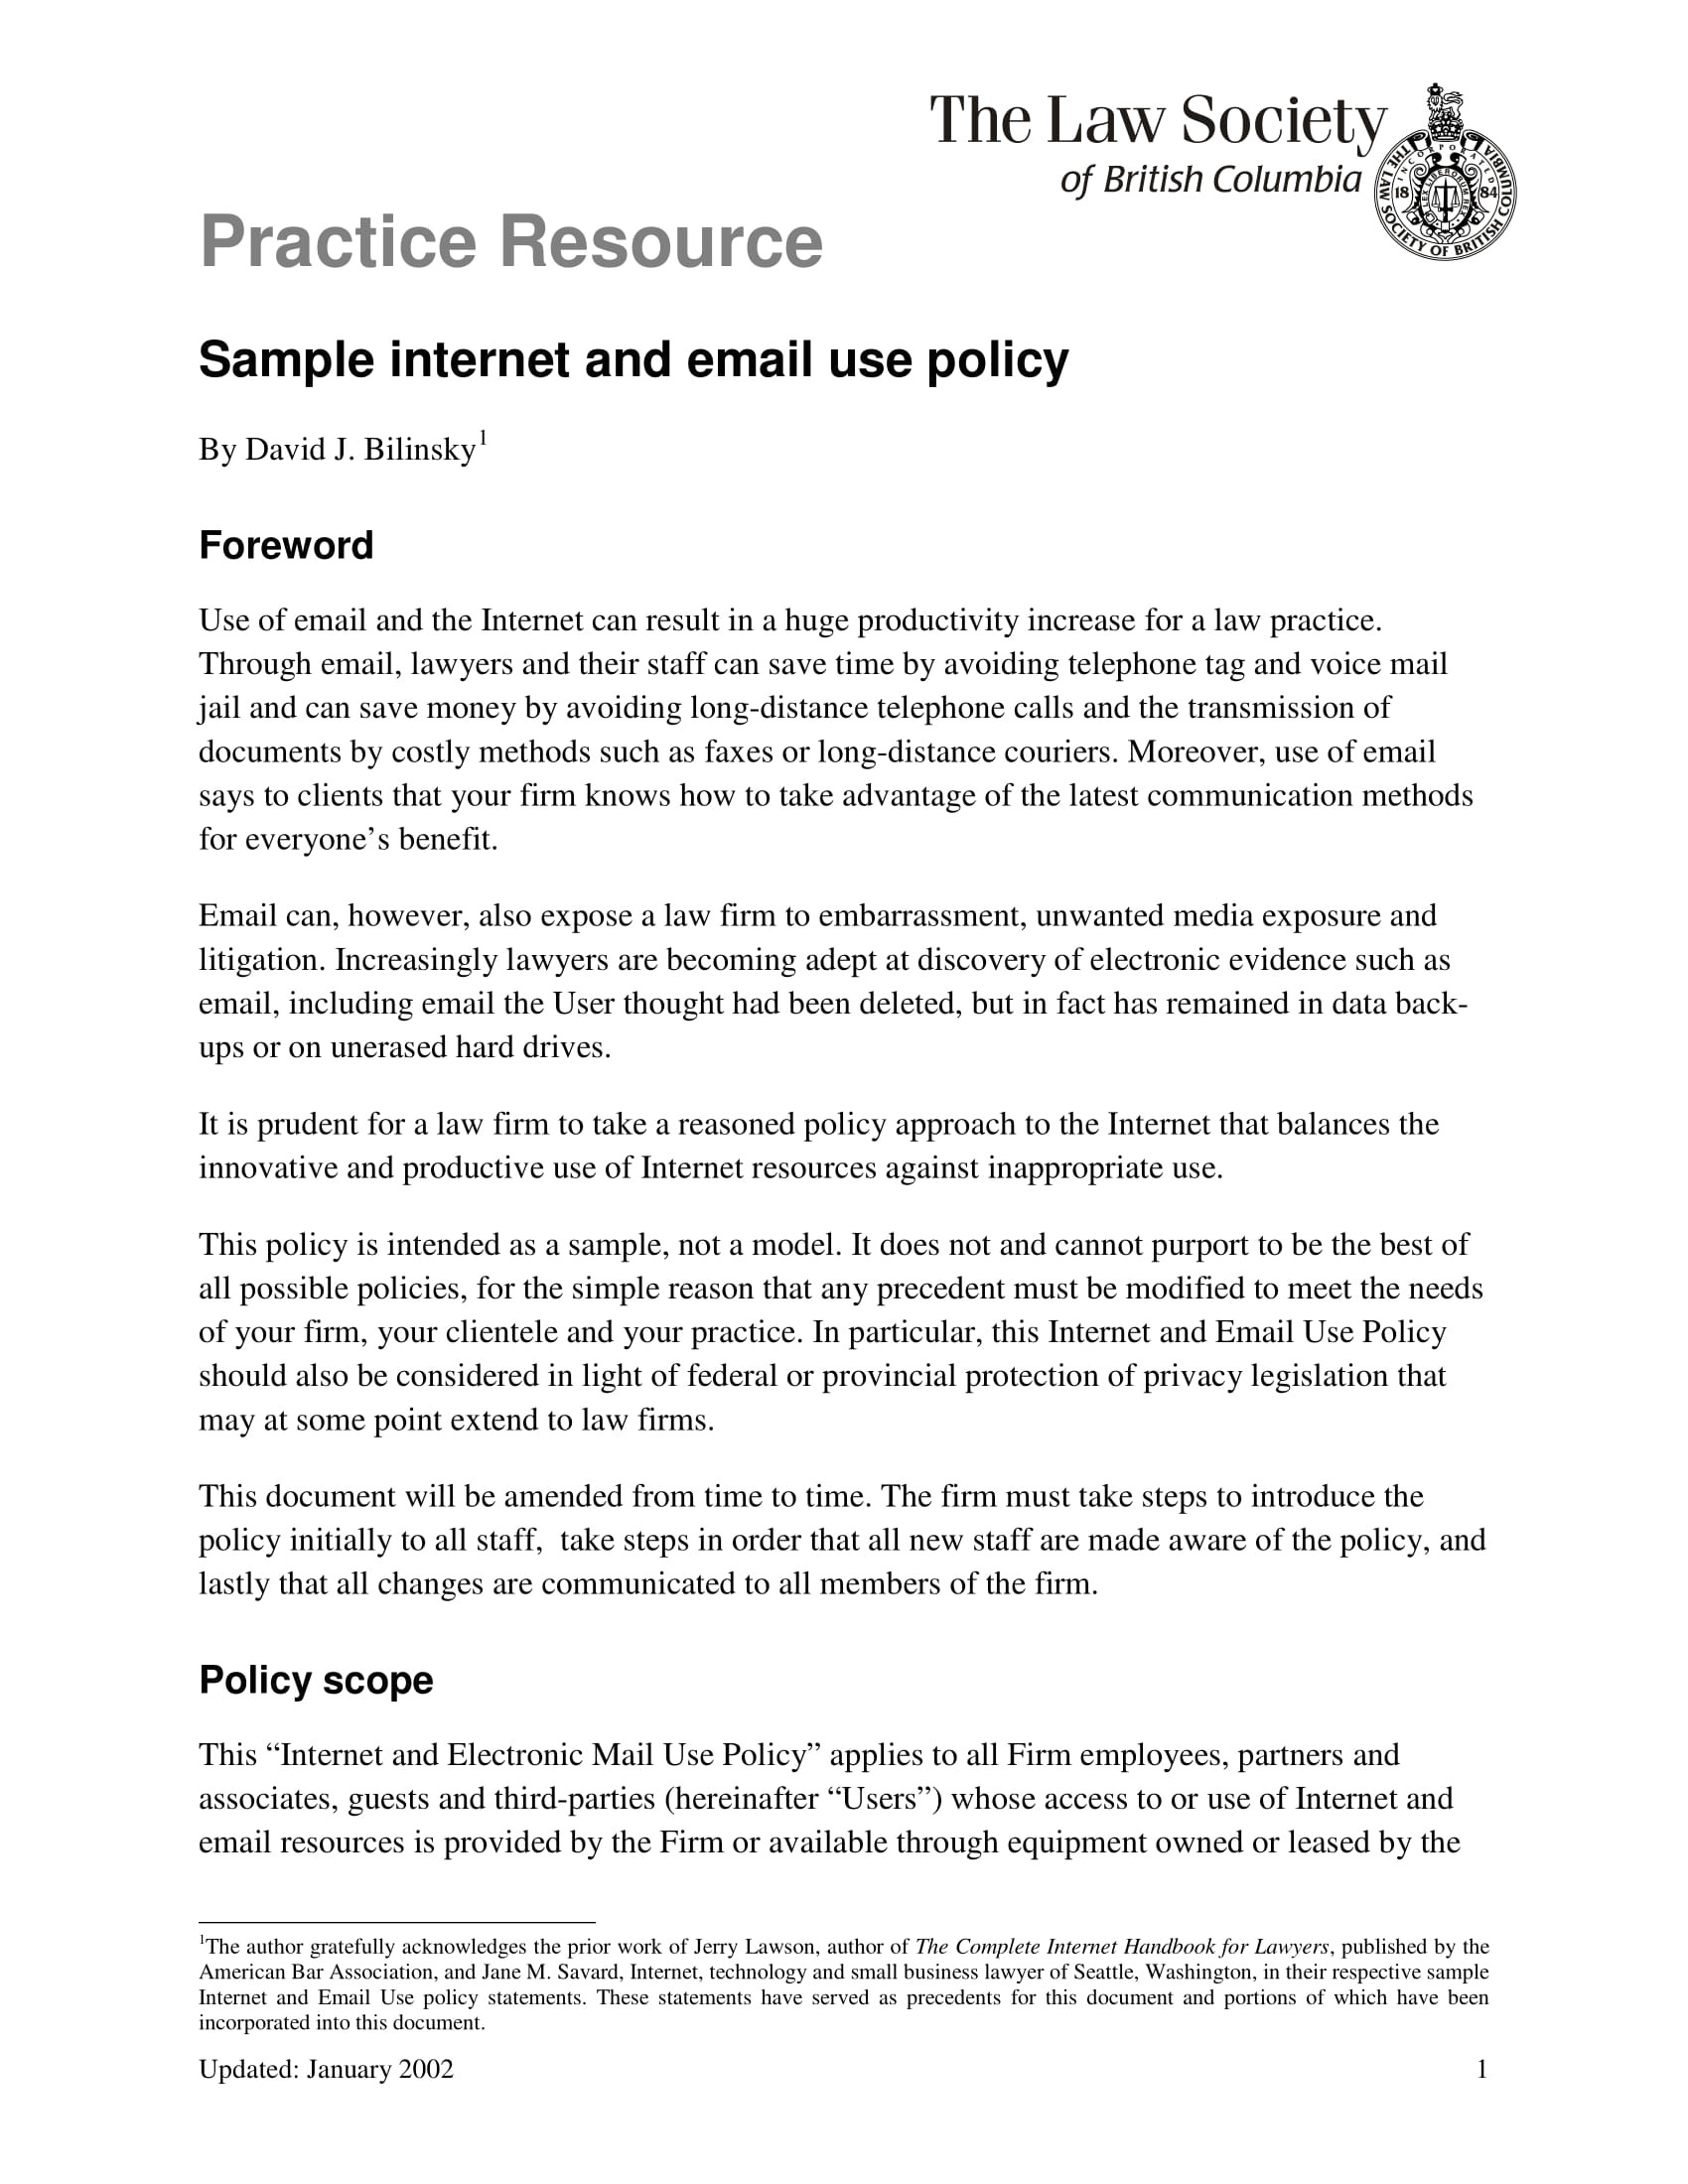 email policy examples pdf